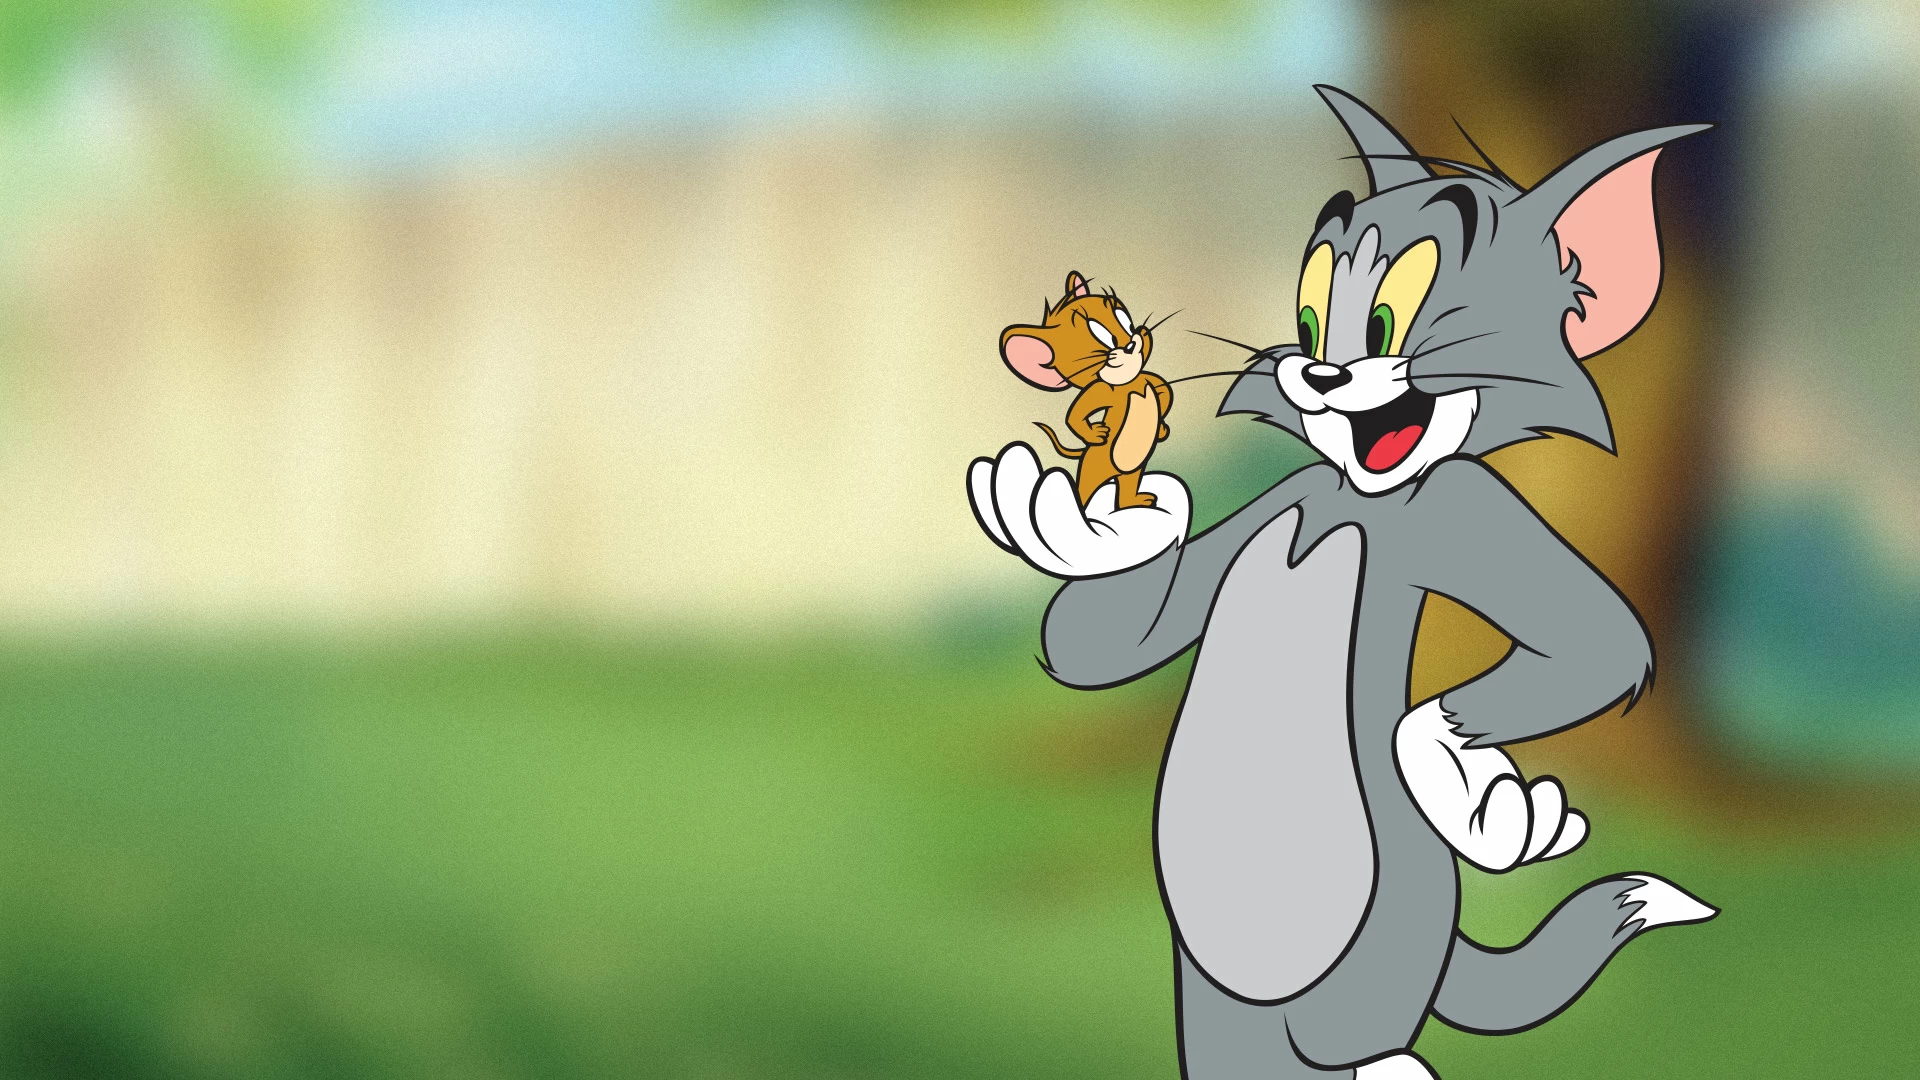 Tom and Jerry were named after a famous drink.